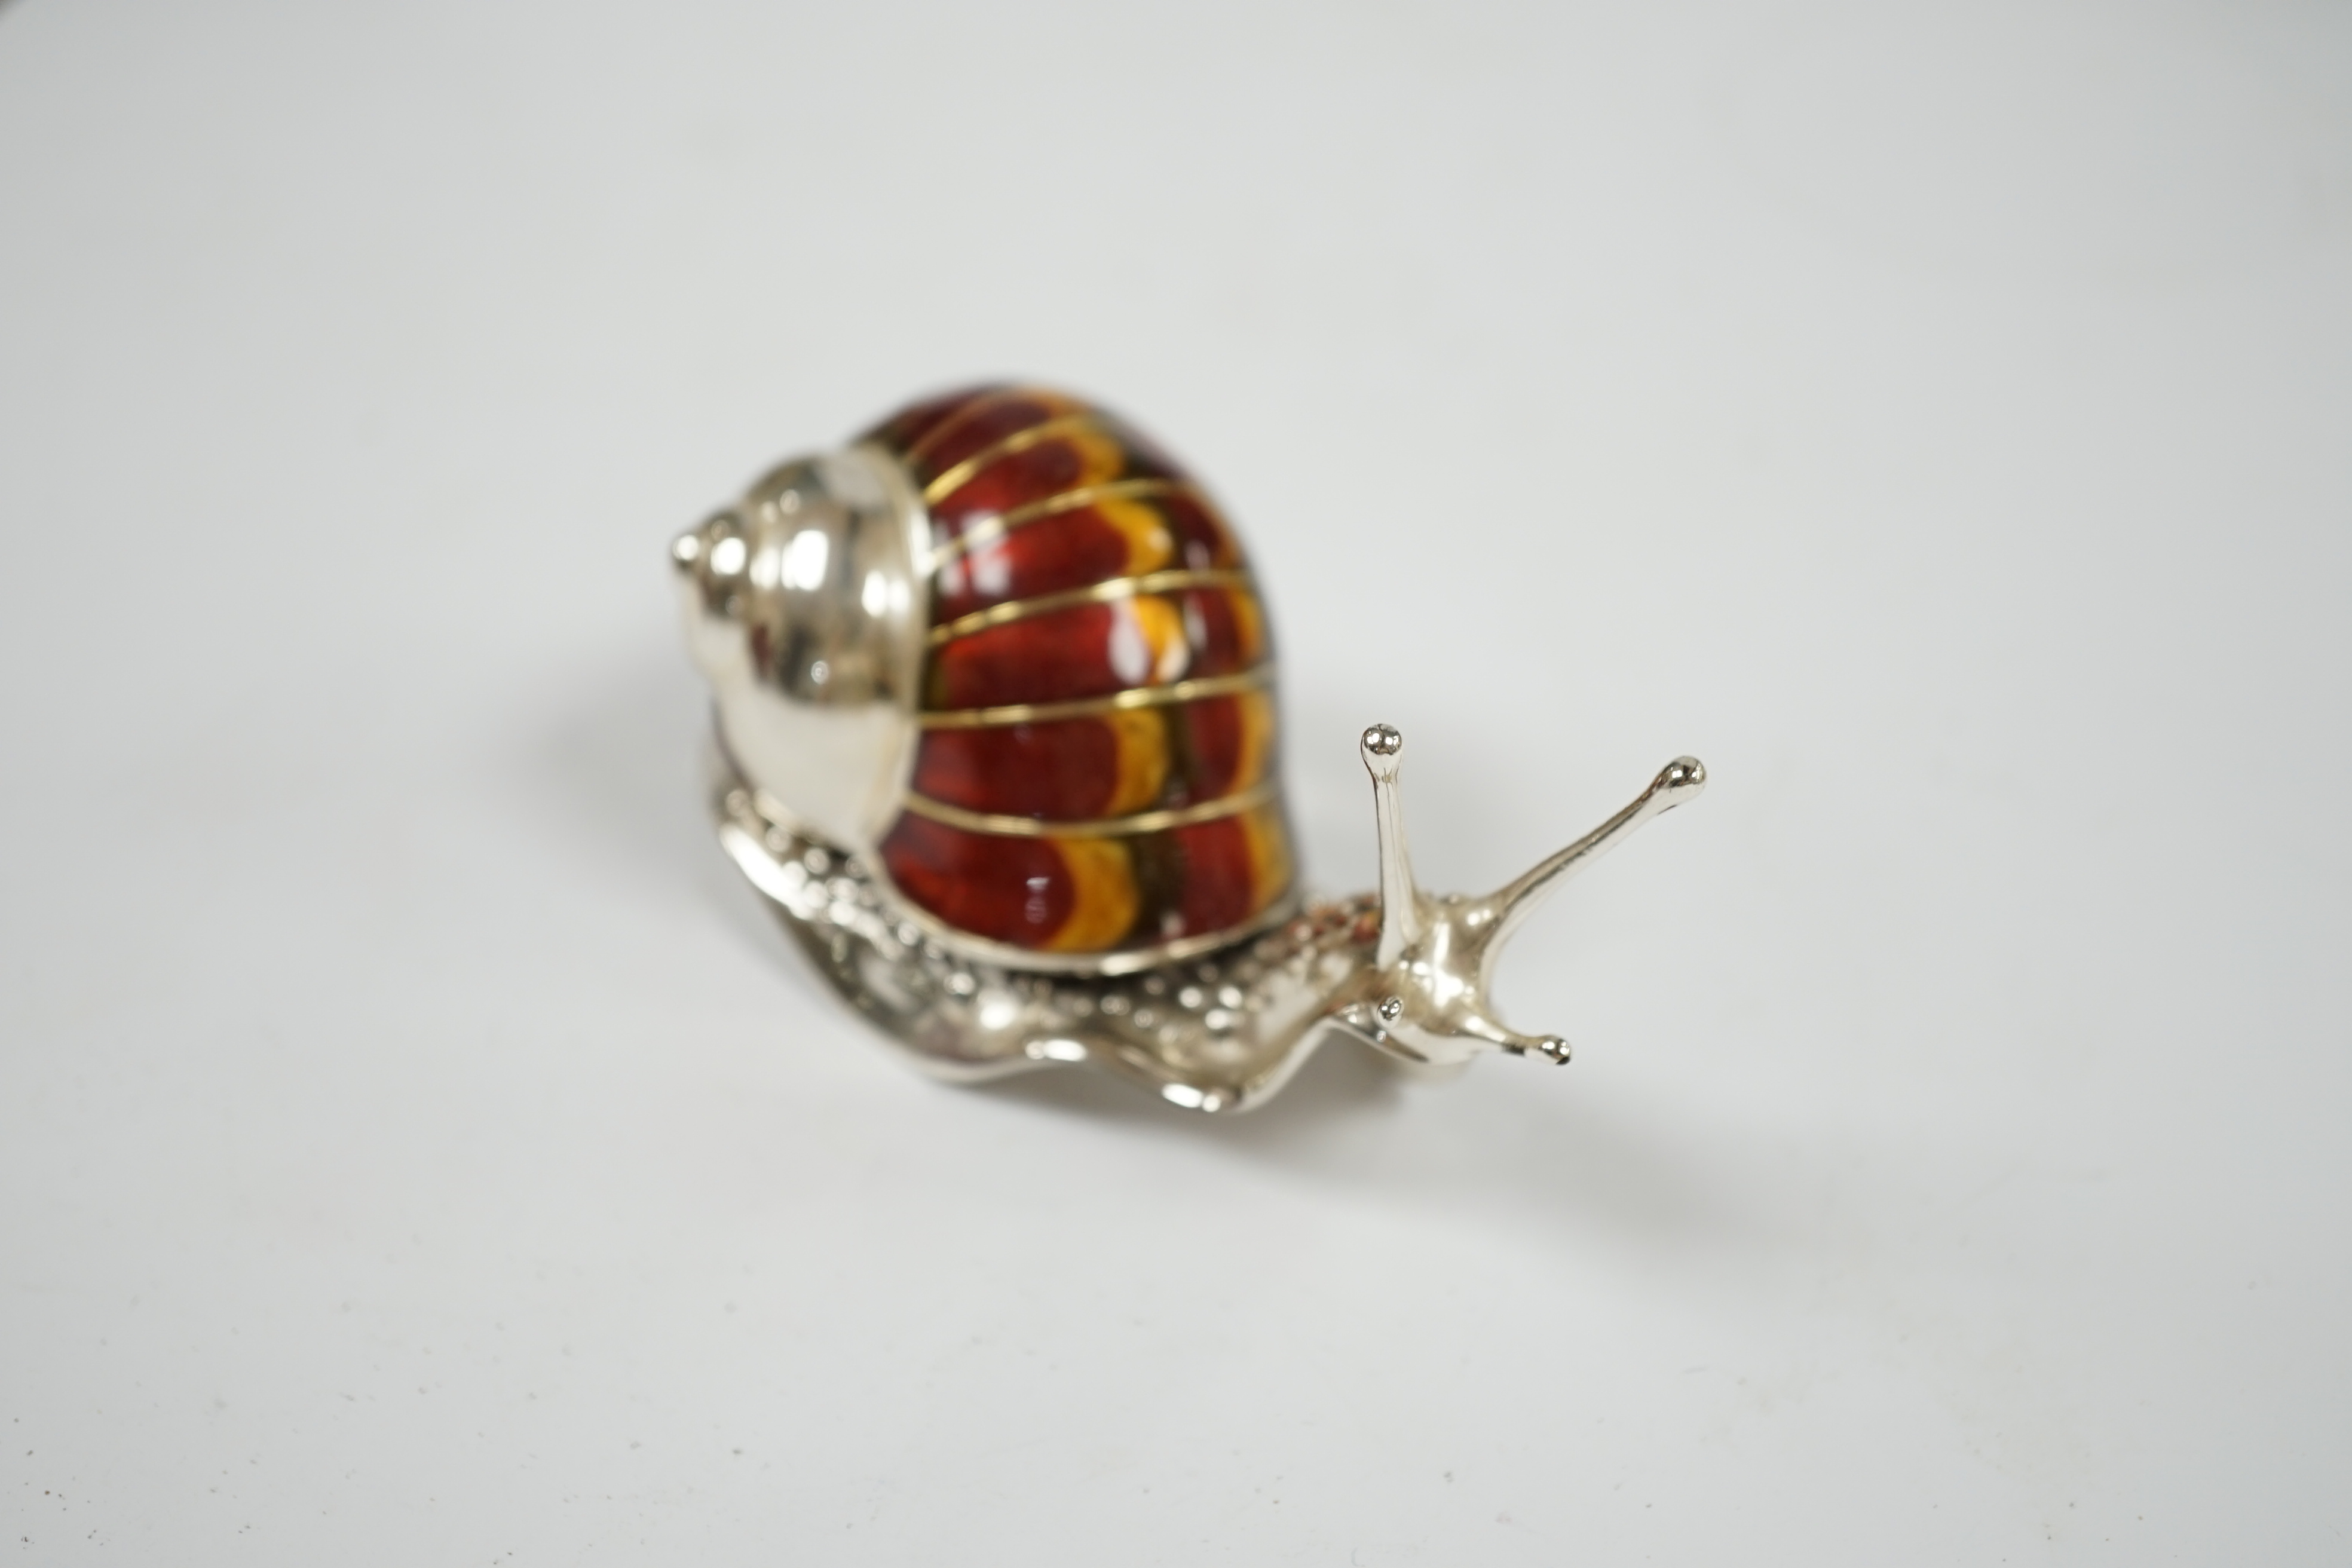 A Saturno silver and enamel model of a snail, by Francis Howard, length 10cm, gross weight 5oz. Condition - good